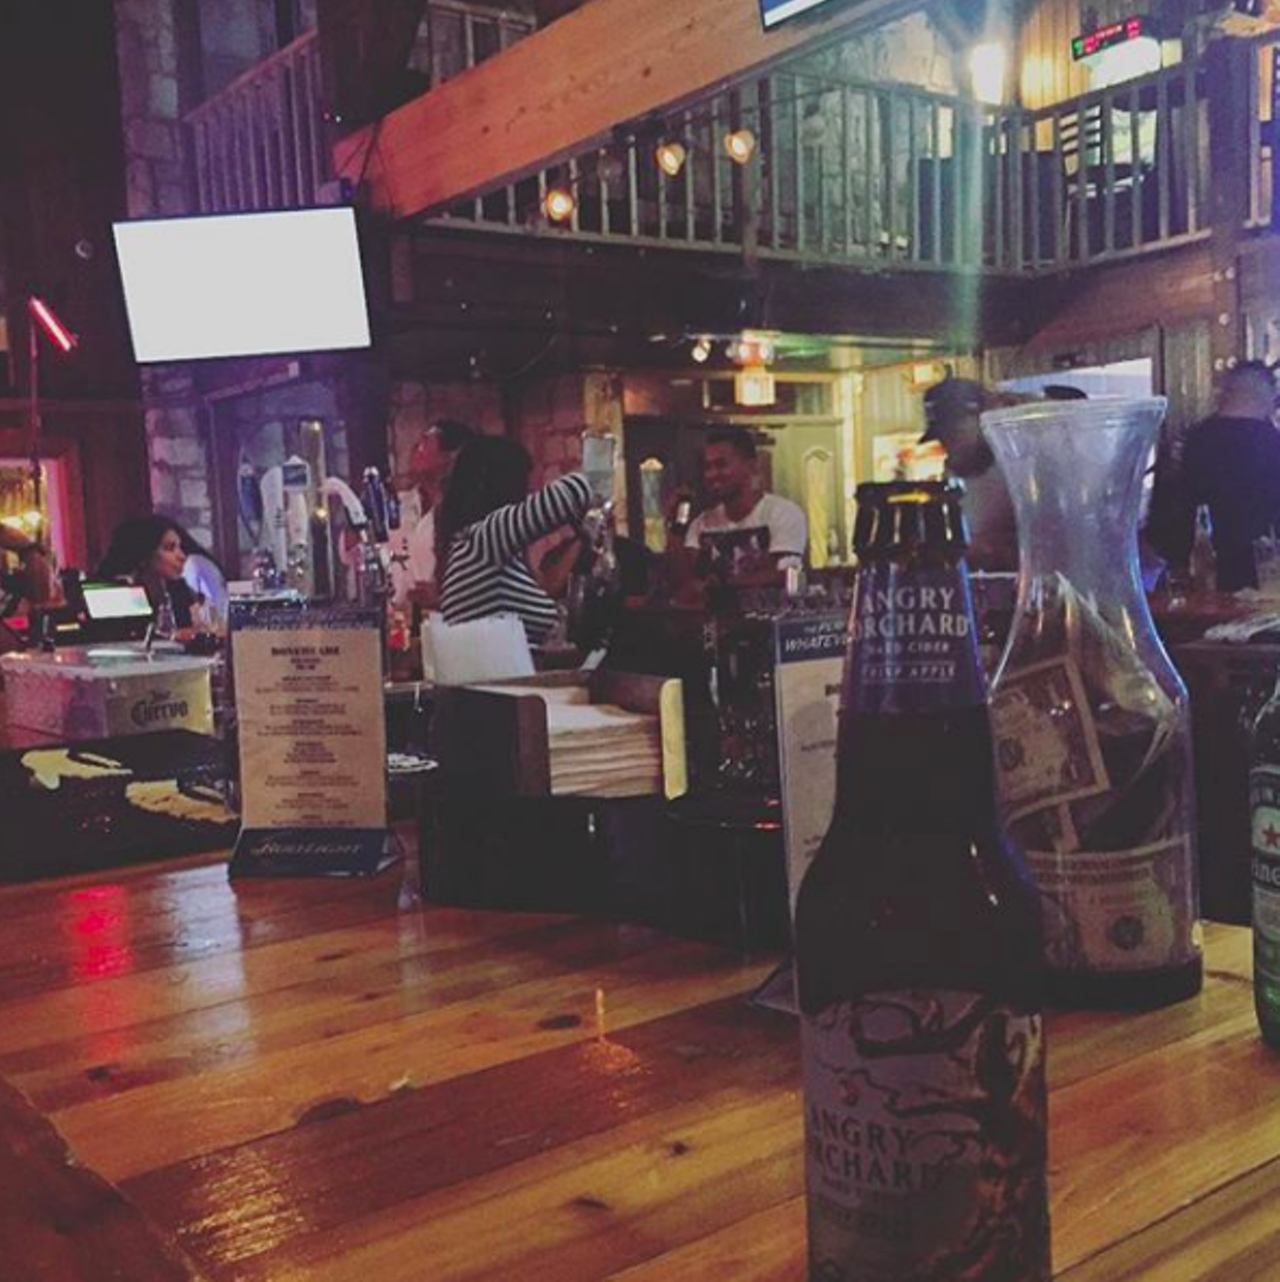 Boneheadz
9503 Console Dr
Round up the bros and have a boys night out on the town, just as long as you visit Boneheadz.  This place is like a cross between a barn, a church and a frat house – and that’s okay. Just know that you’re getting yourself into a wild night.
Photo via Instagram / 4everlondonbound